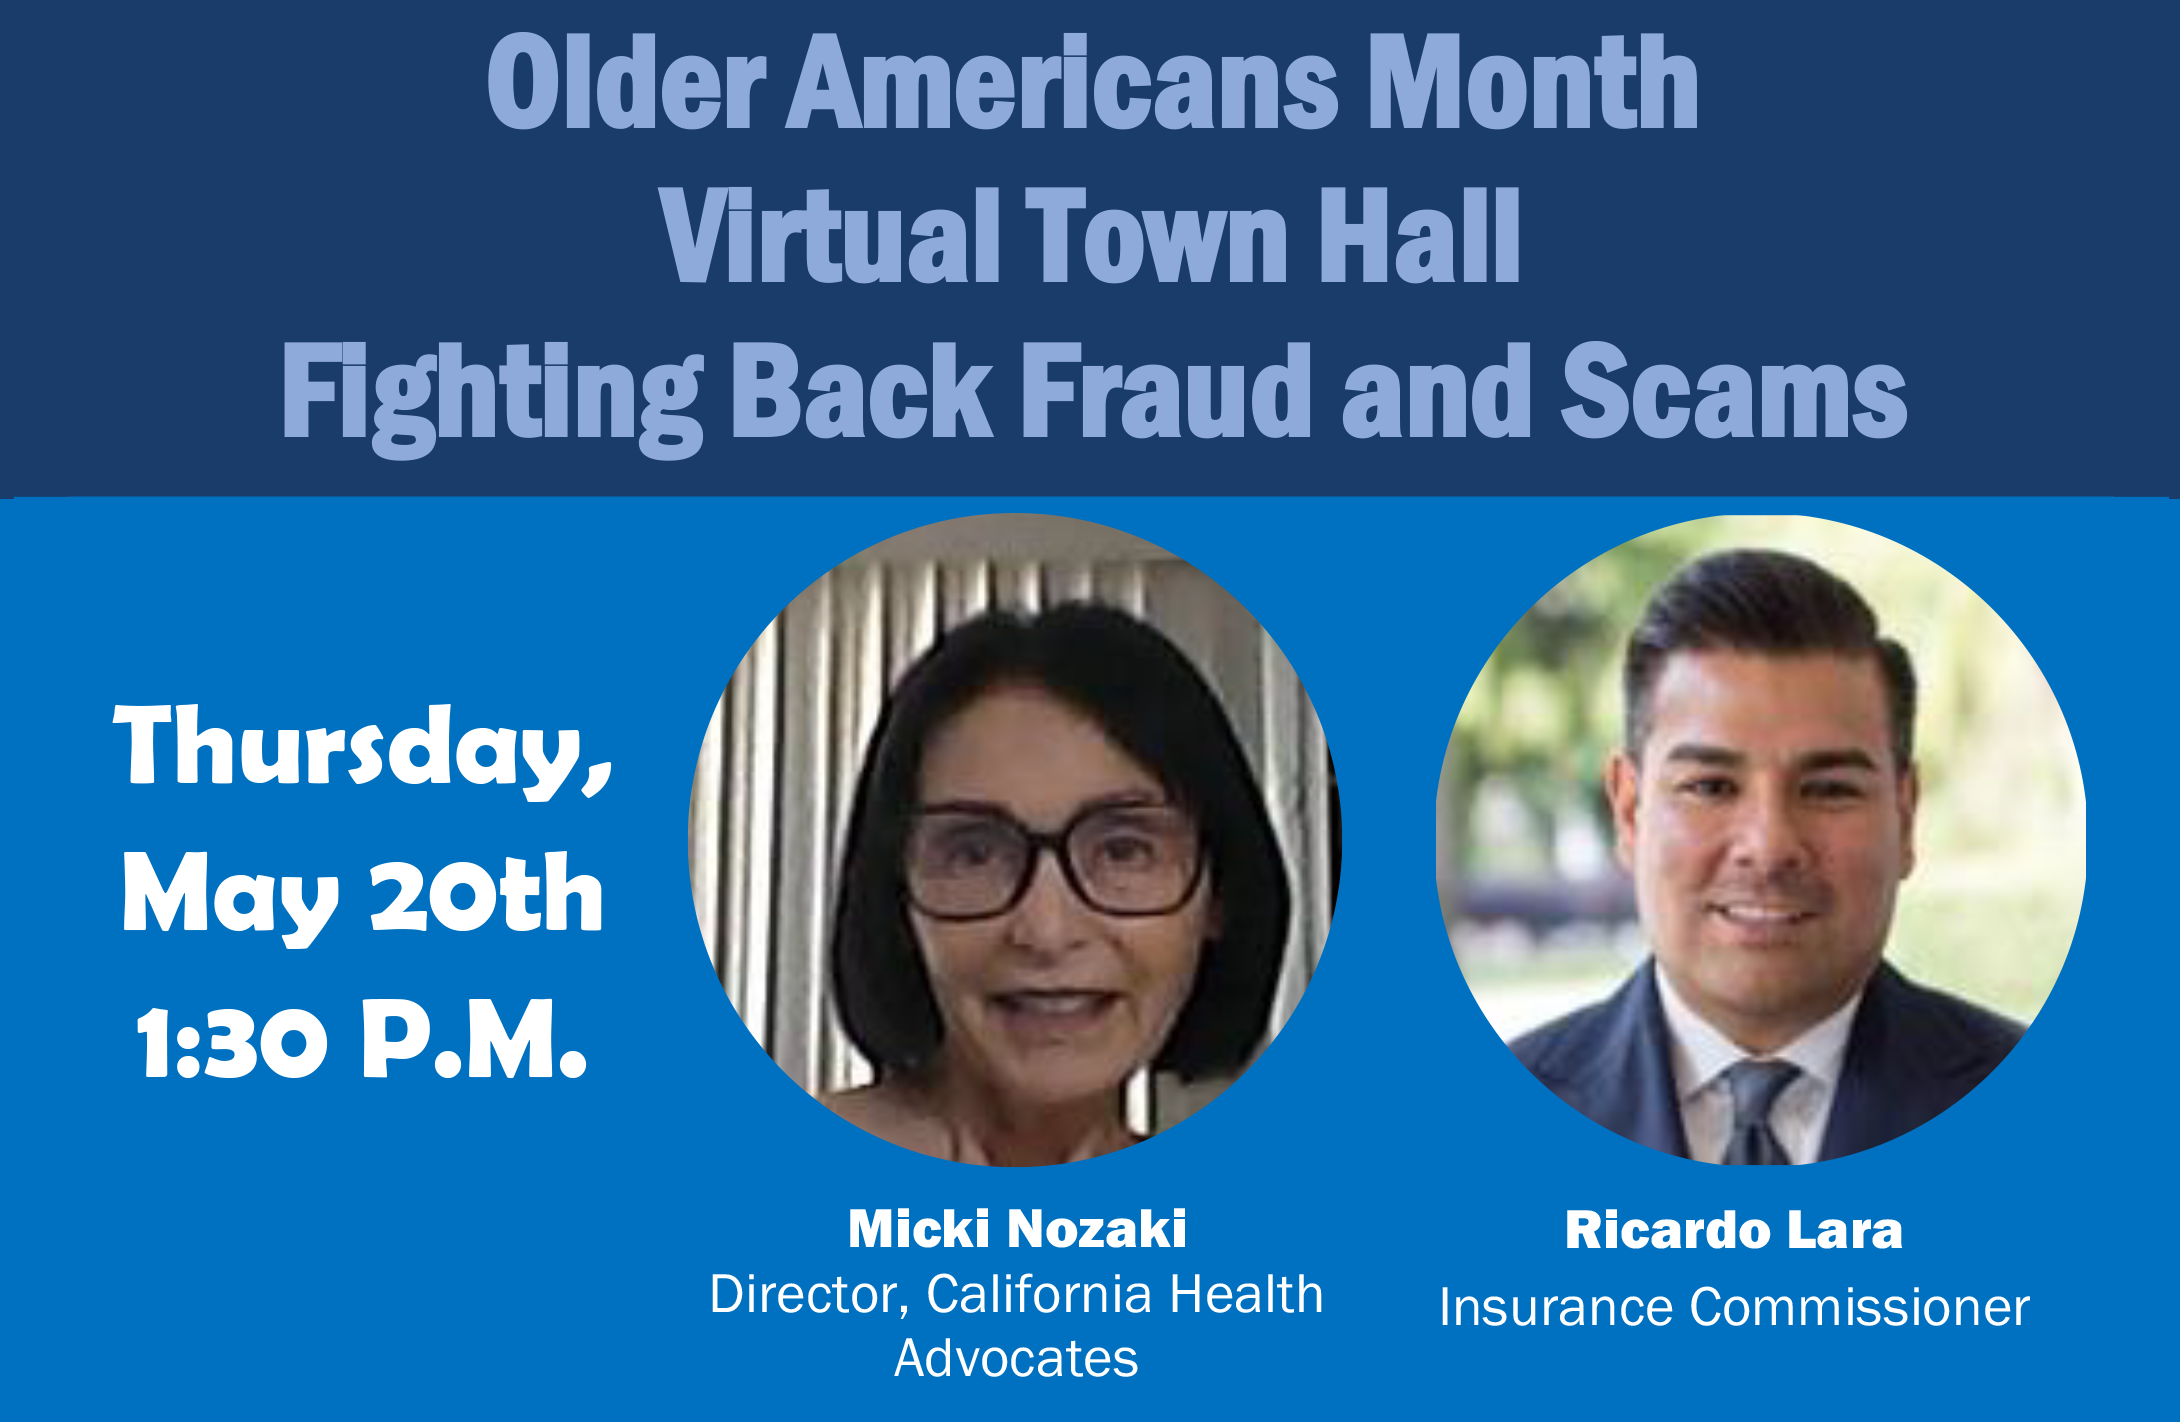 Older Americans Month Virtual Town Hall
Fighting Back Fraud and Scams
Thursday, May 20th, 1:30 P.M.
With Micki Nozaki, Director, California Health Advocates
and Ricardo Lara, Insurance Commissioner